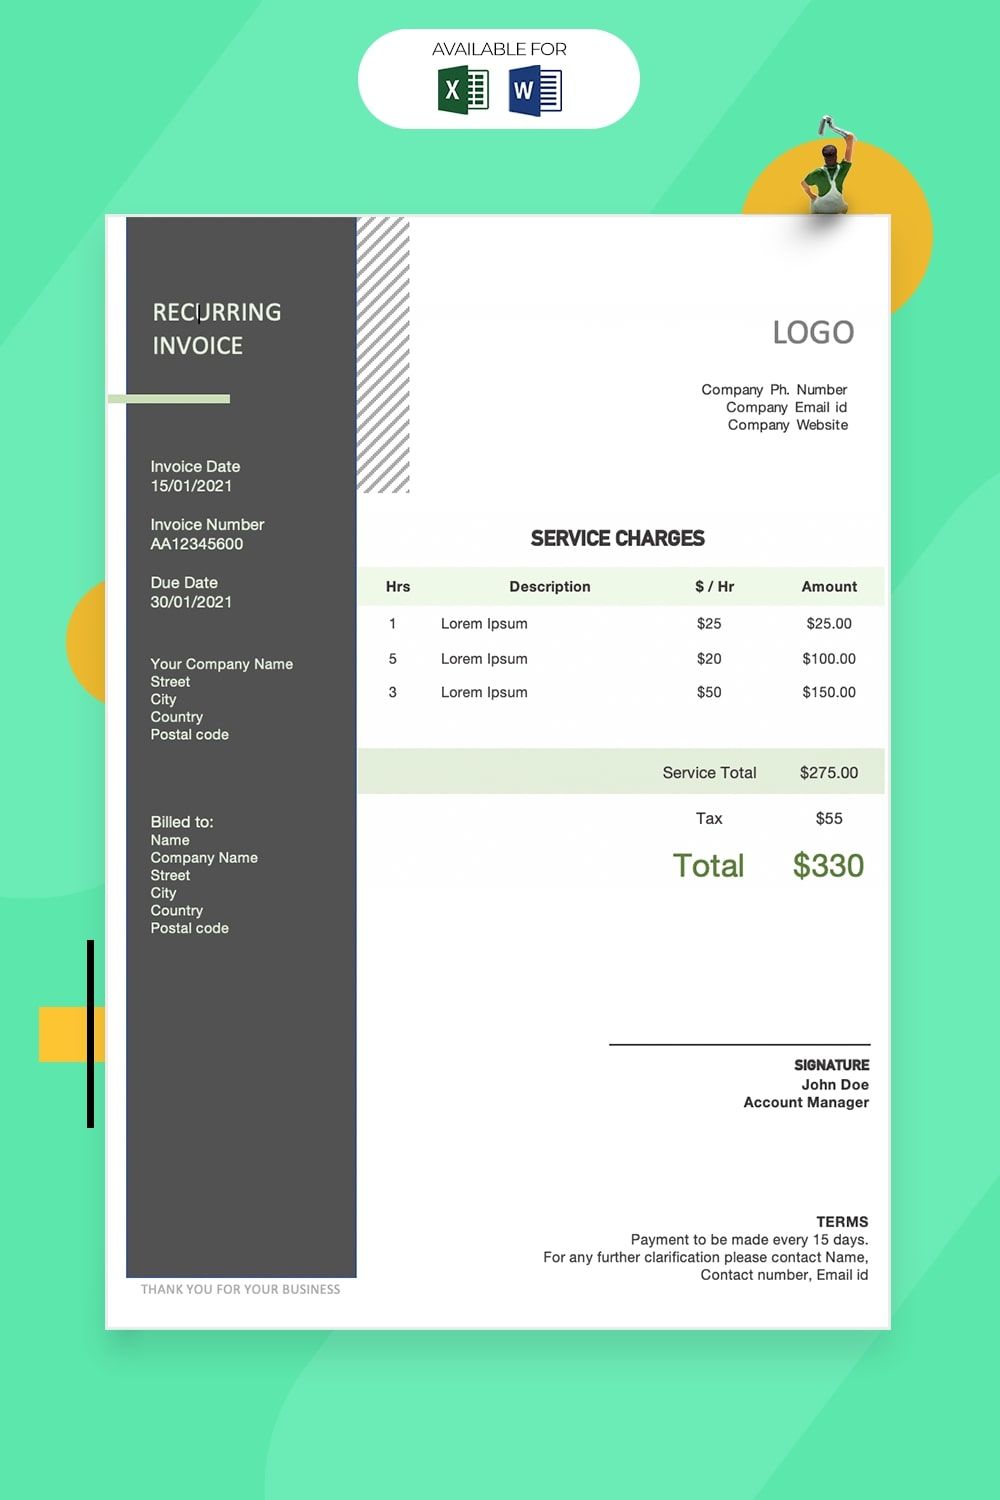 Invoice templates for Word and Excel Free download